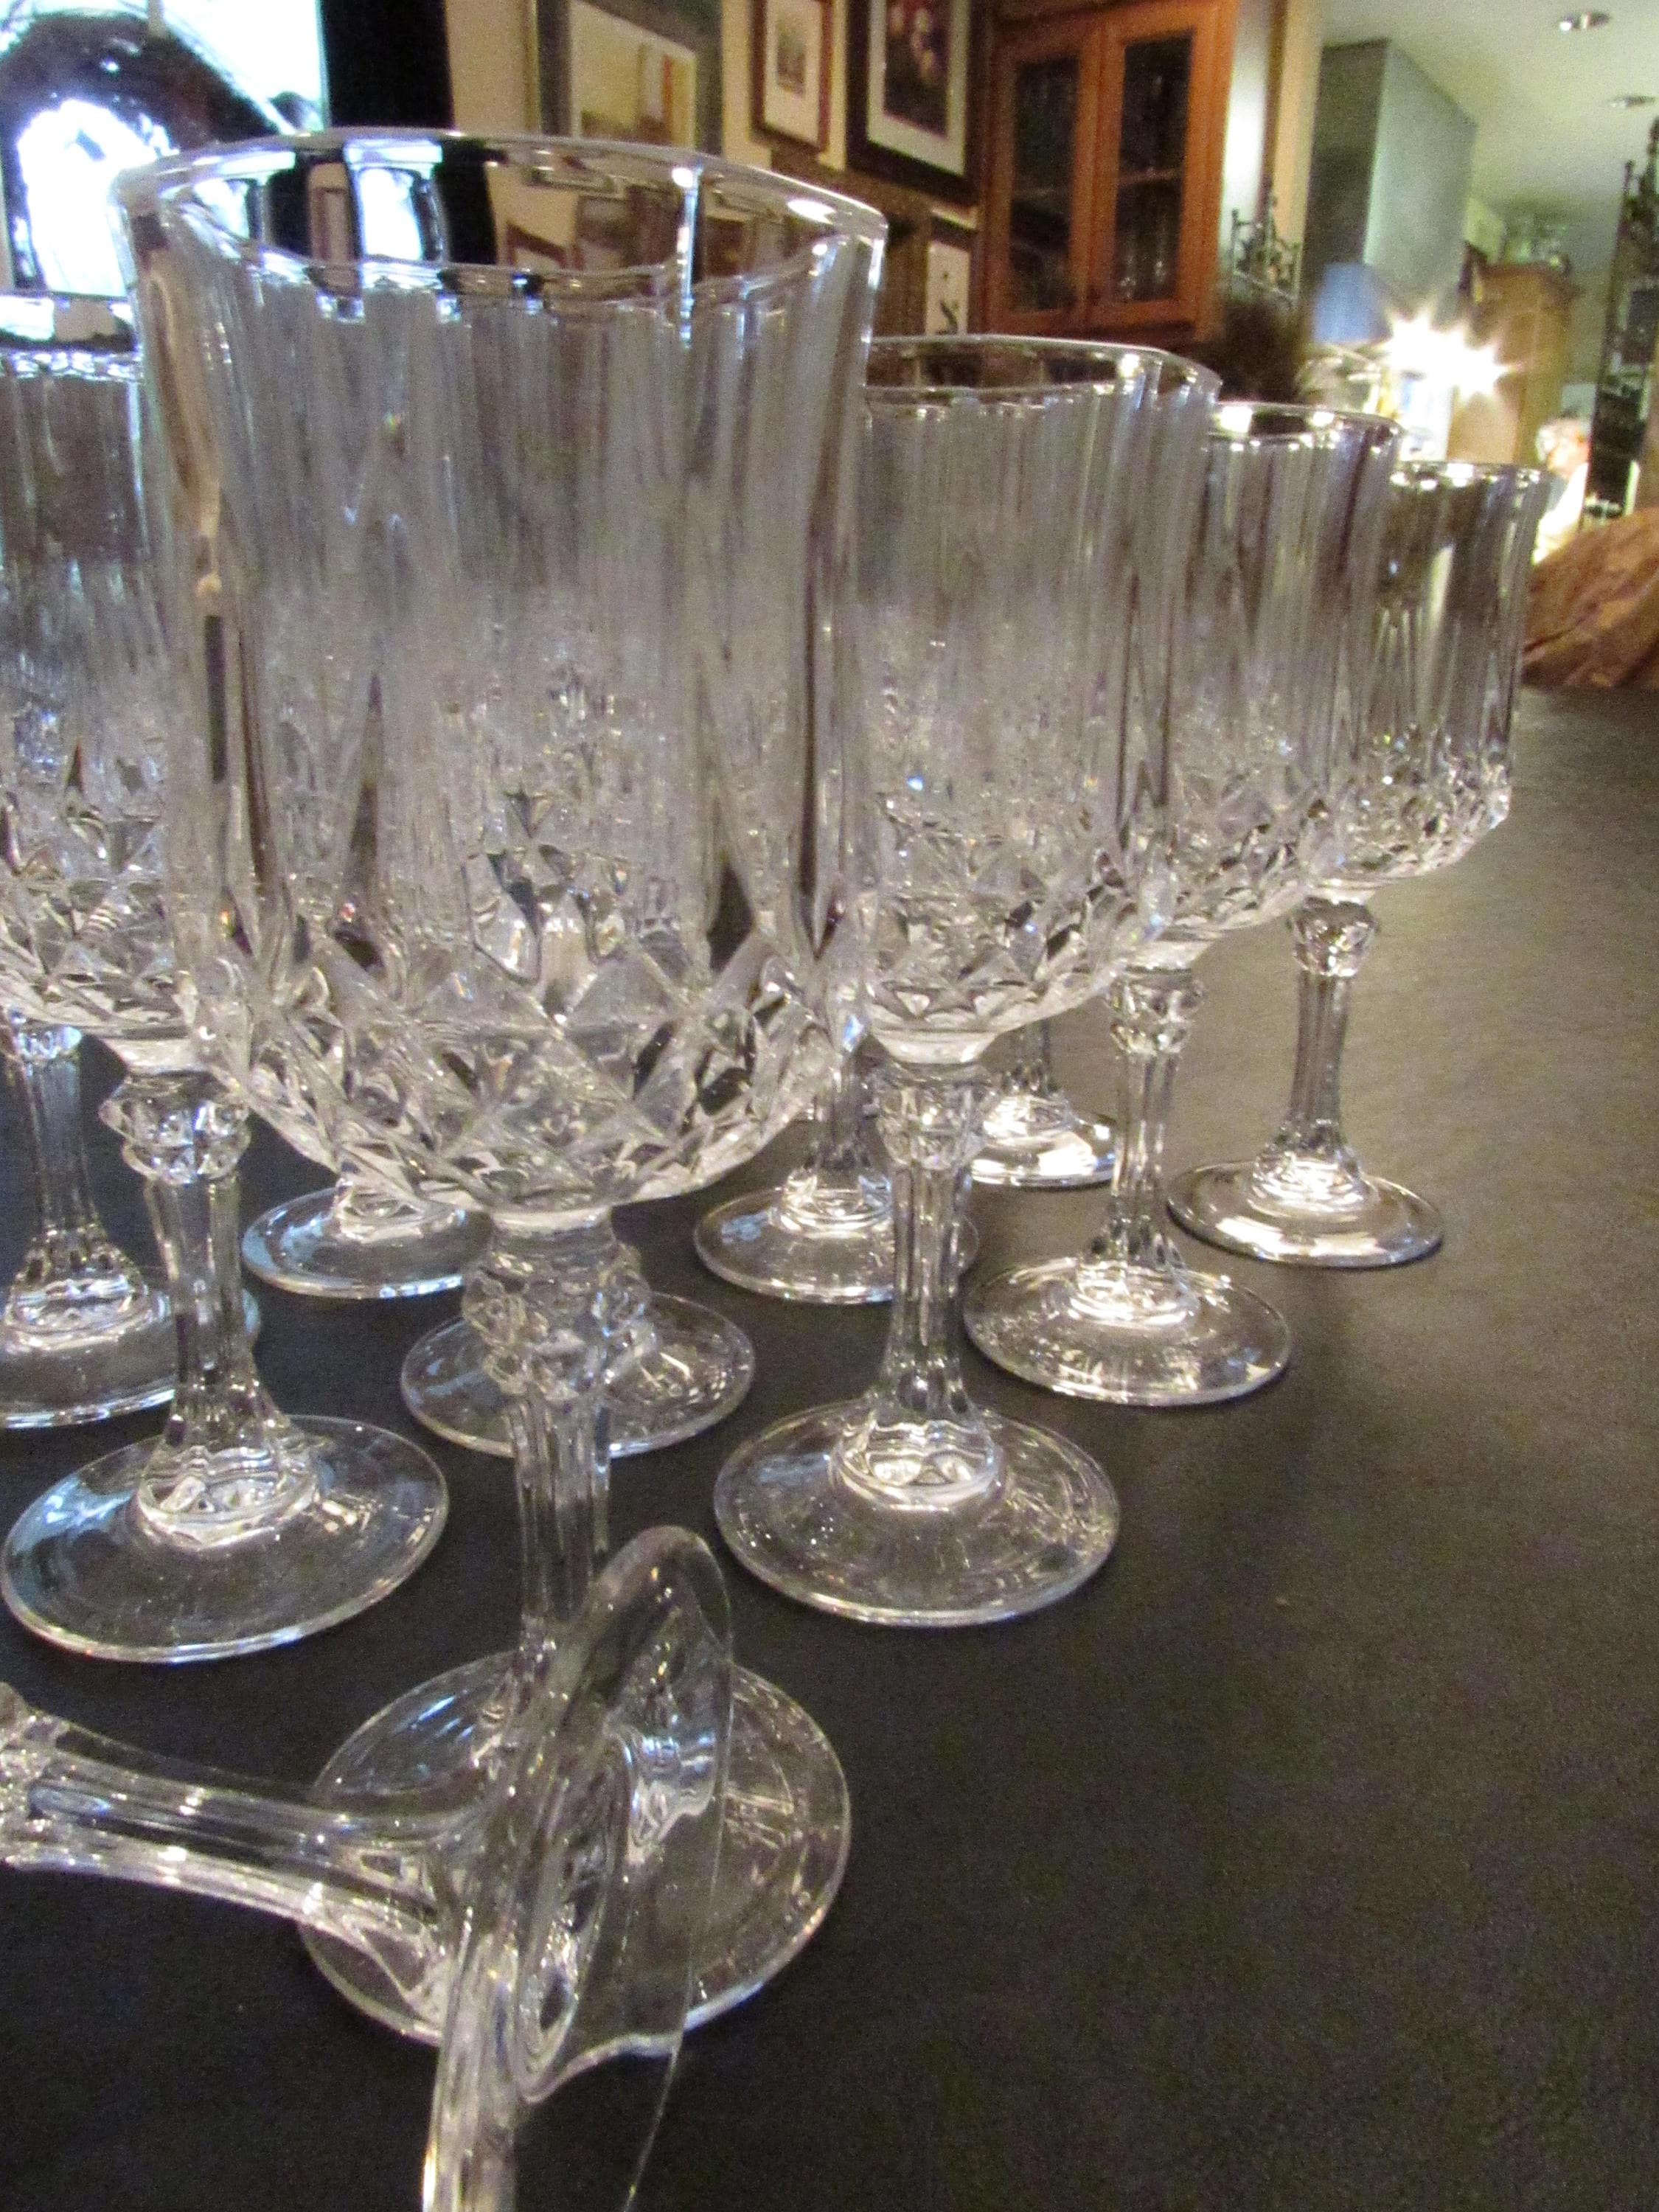 Lead Crystal Water Glass, 24 Percent Lead Crystal, Set of Five, Looks  Similar to Cristal D'arques Longchamps Clear Pattern, Not Exact Match 